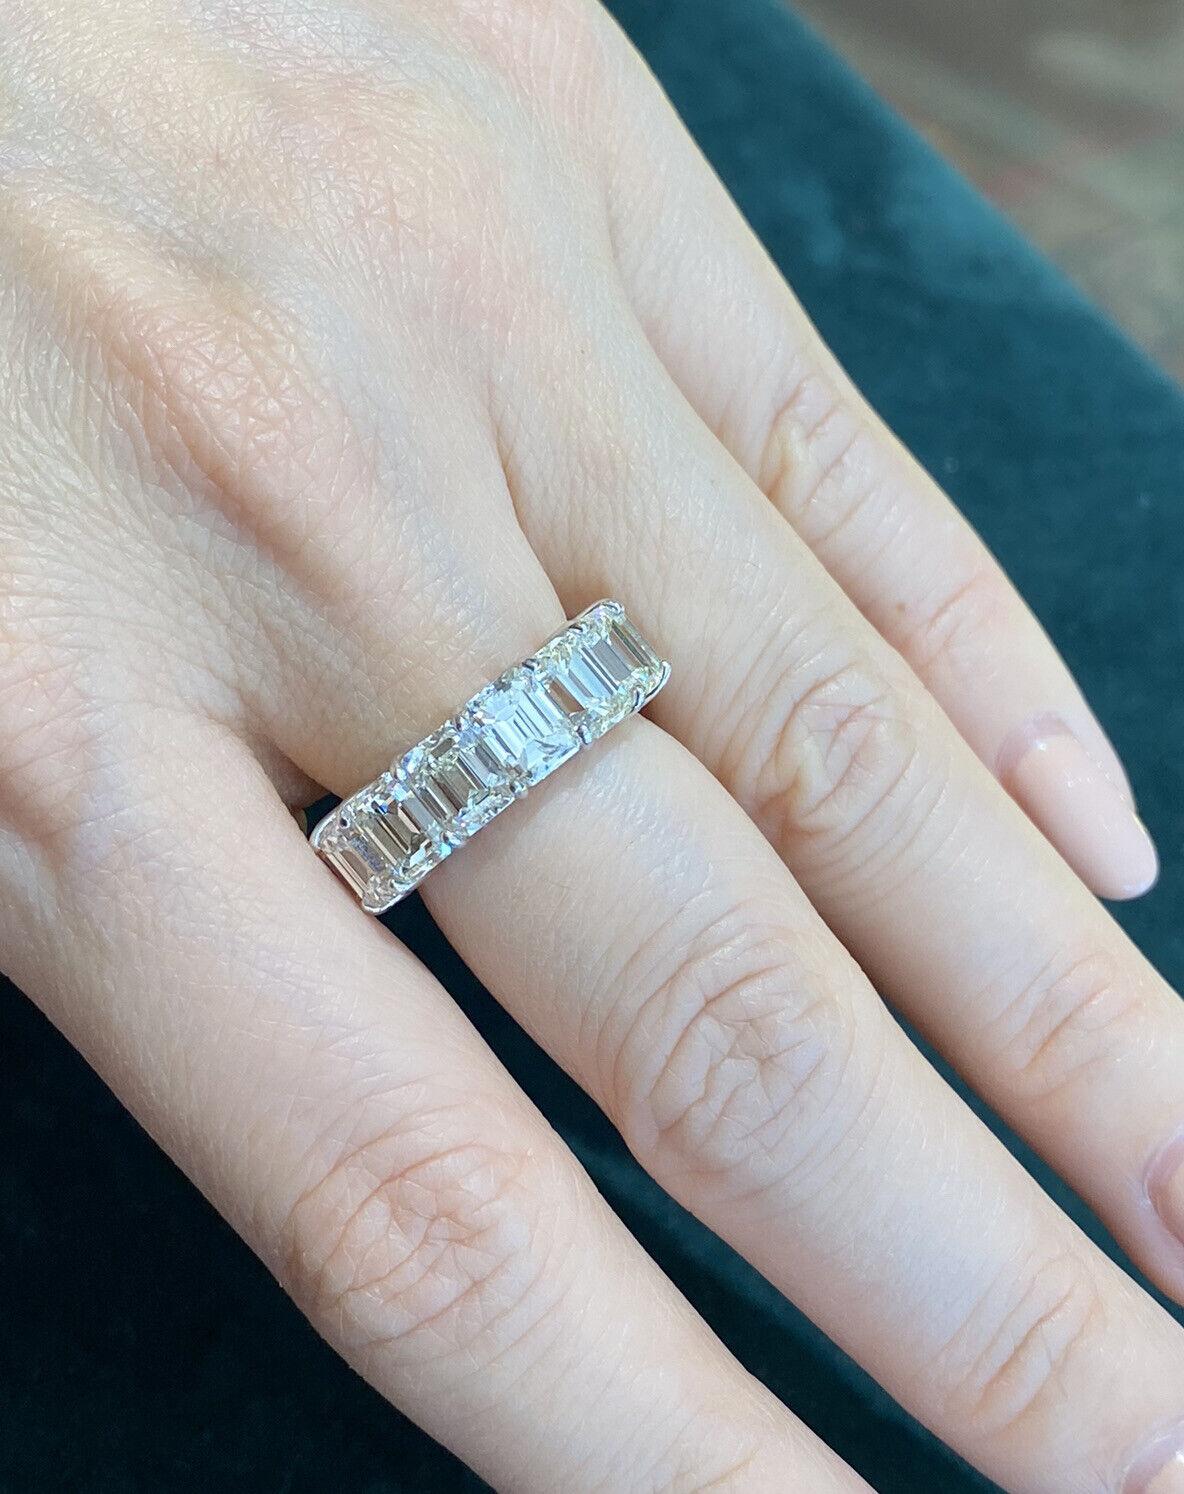 15.16 Cts. Emerald Cut Diamond Eternity Band Ring in Platinum For Sale 3